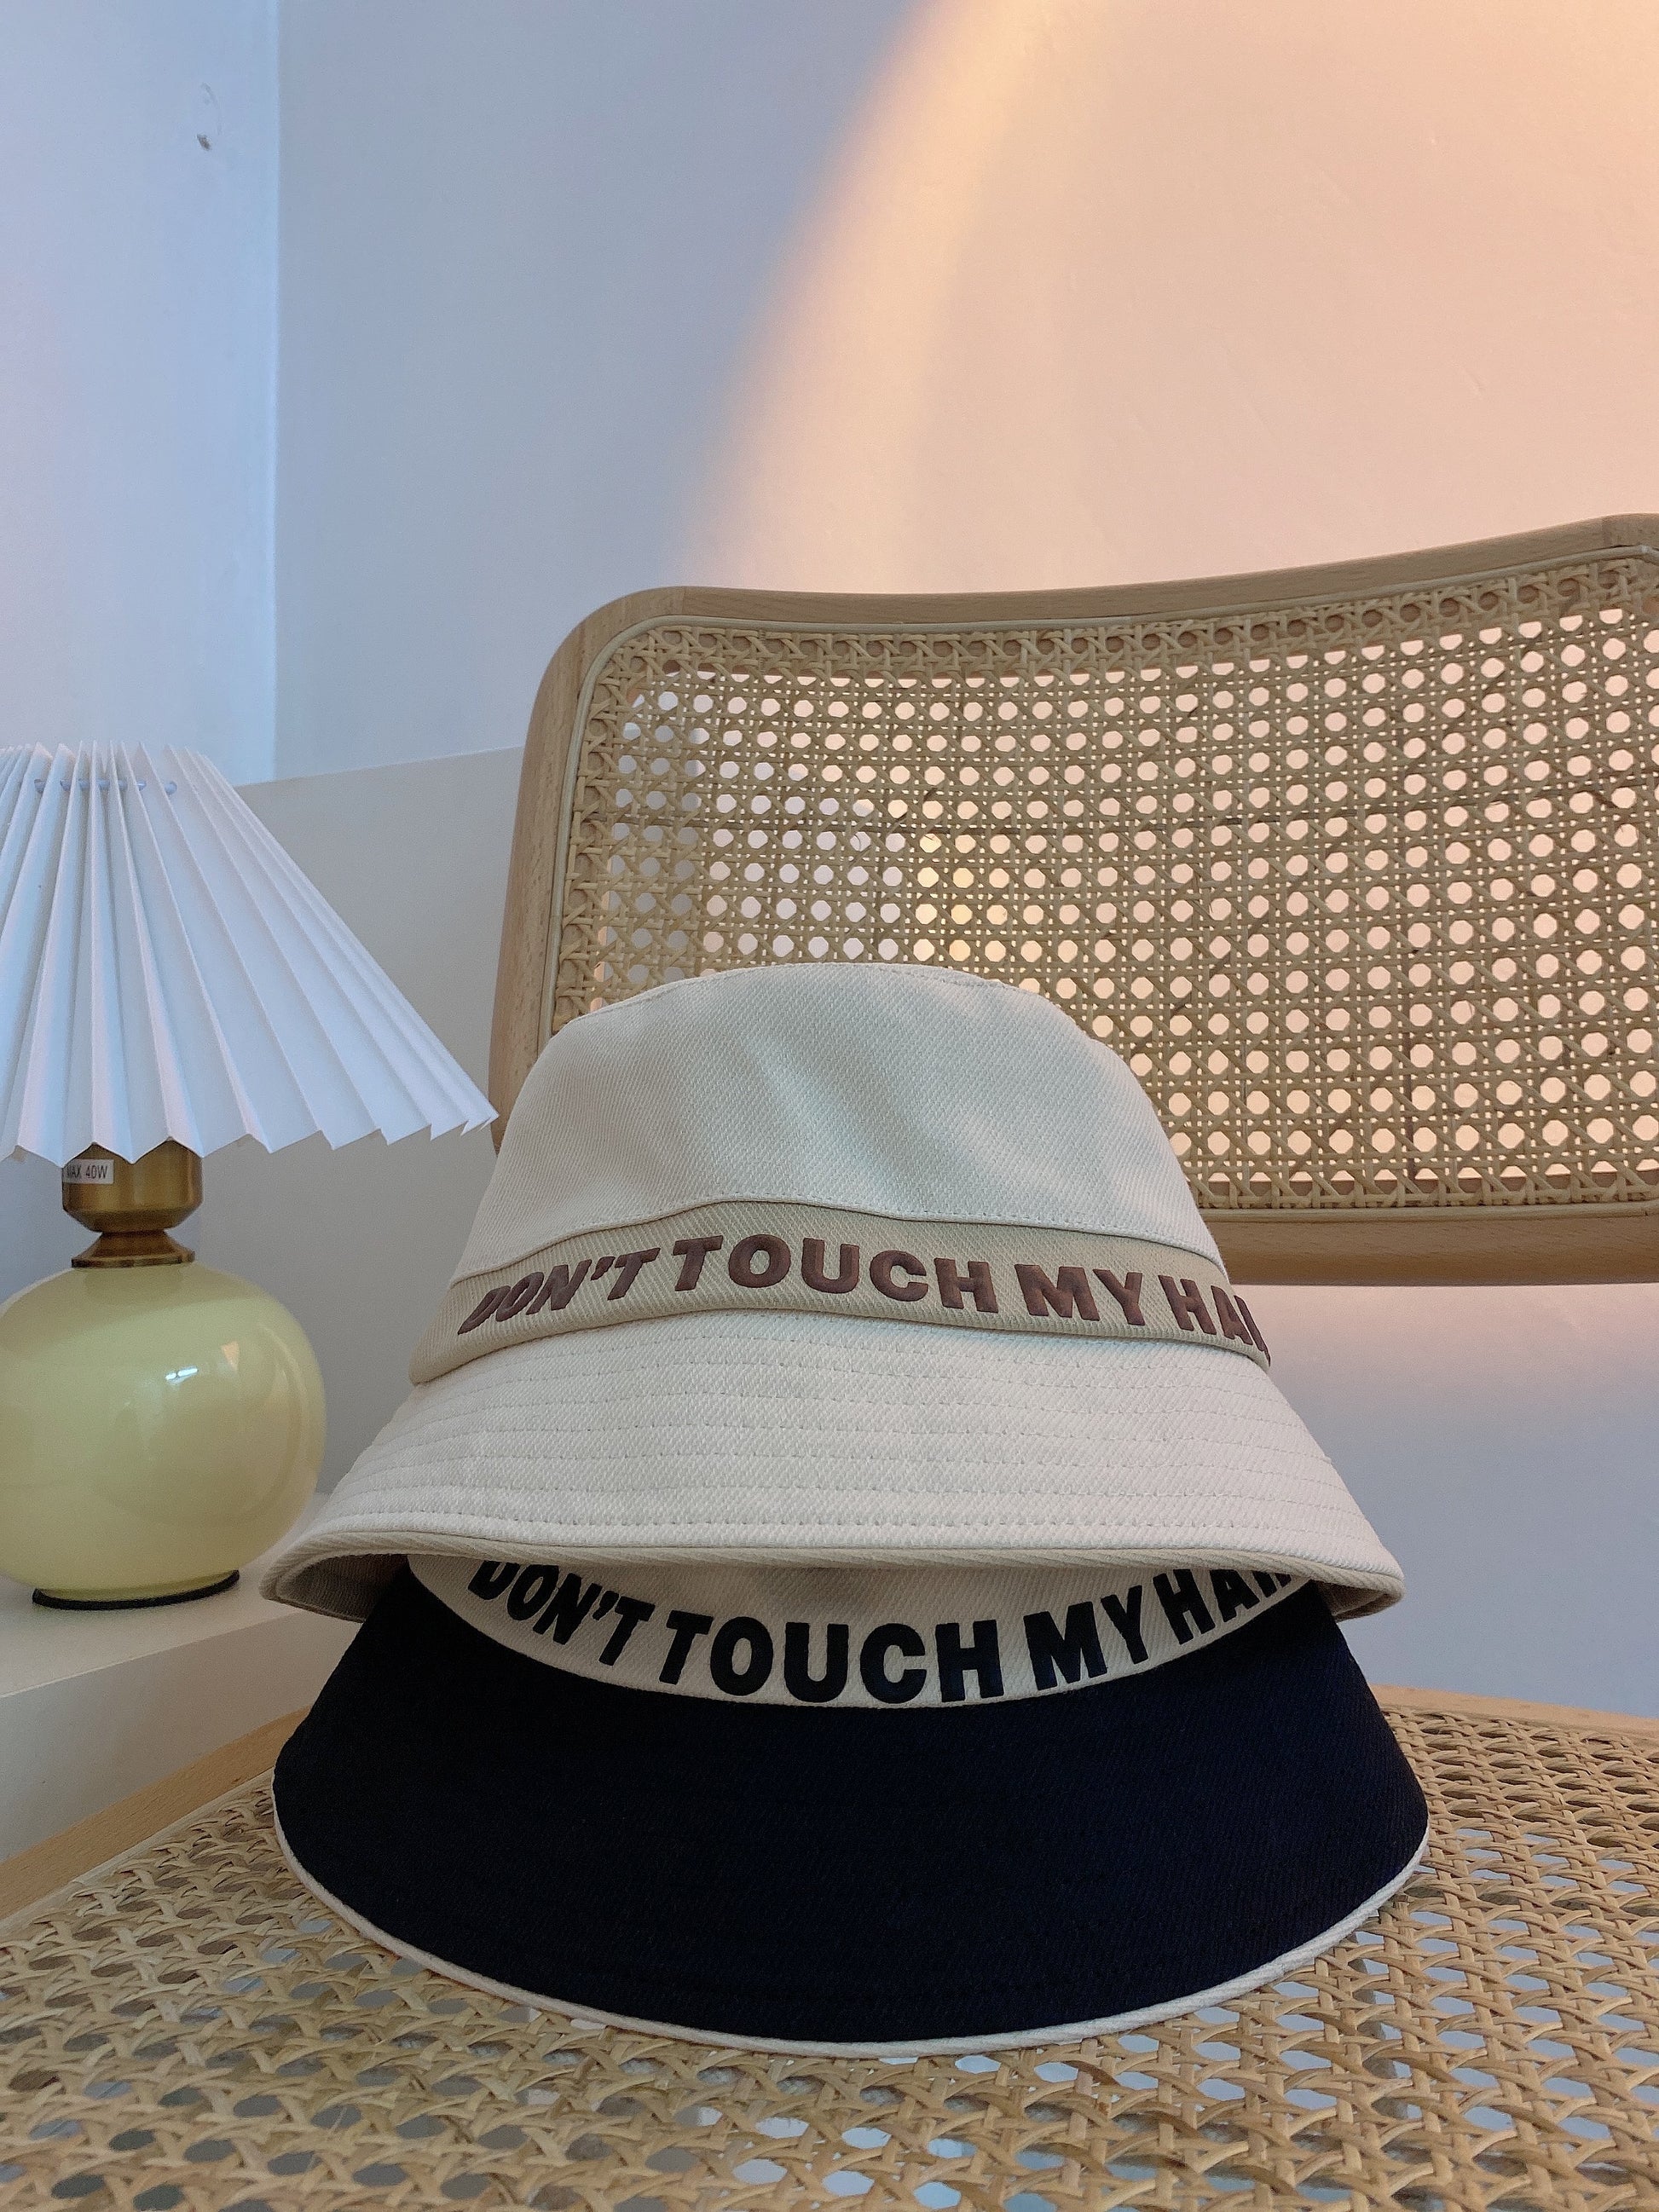 Hat - Don't touch my hair